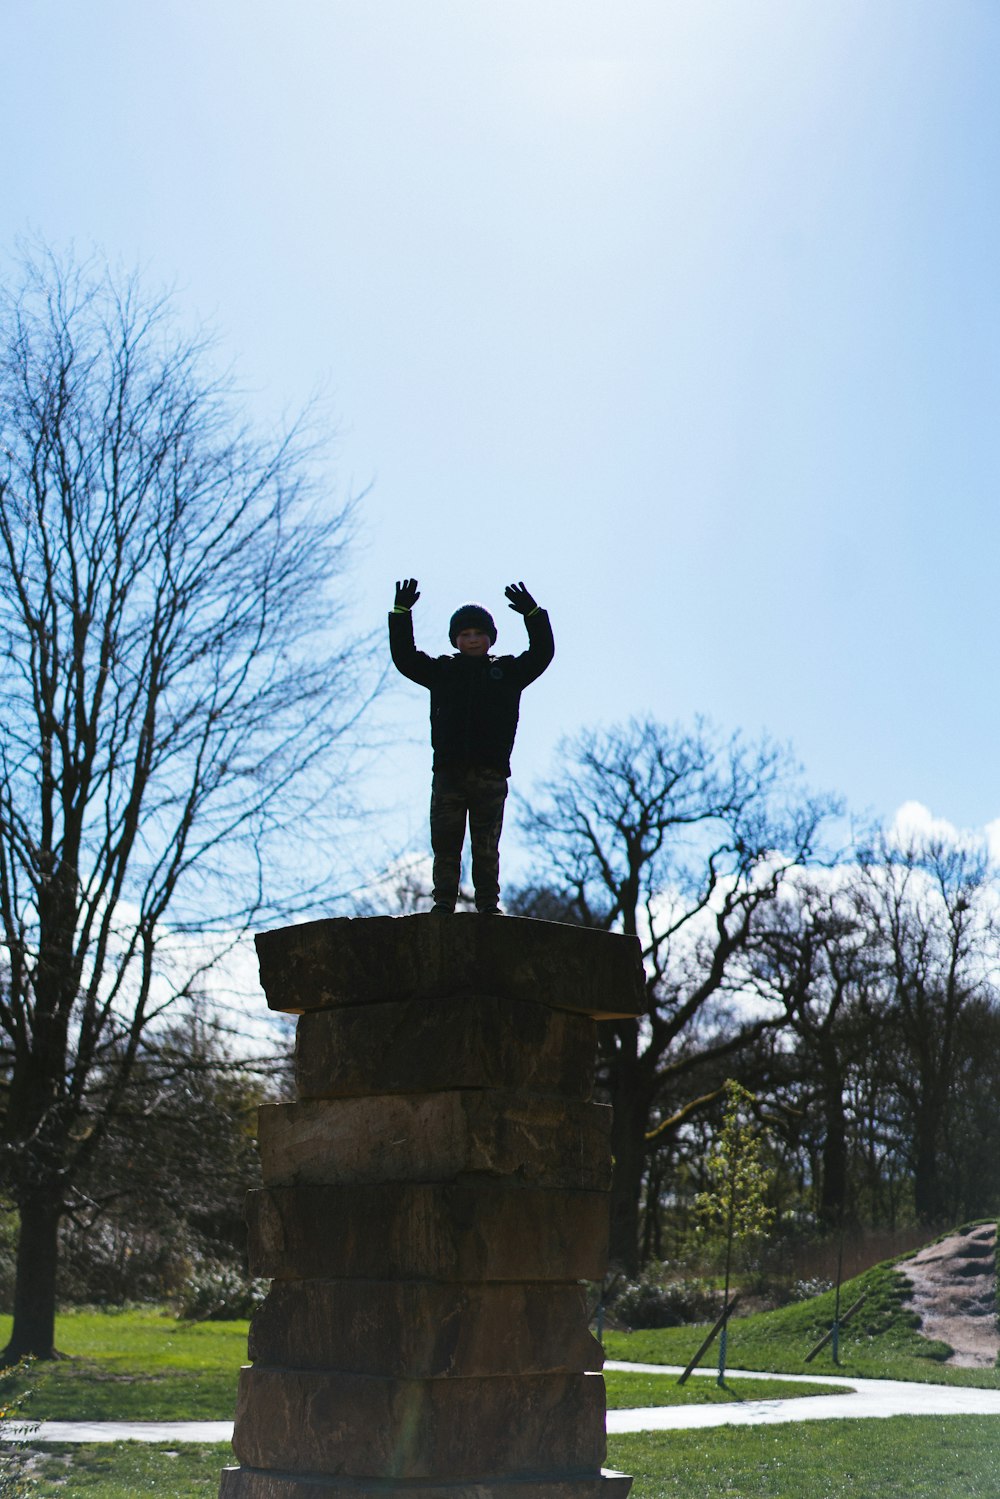 a man standing on top of a statue in a park